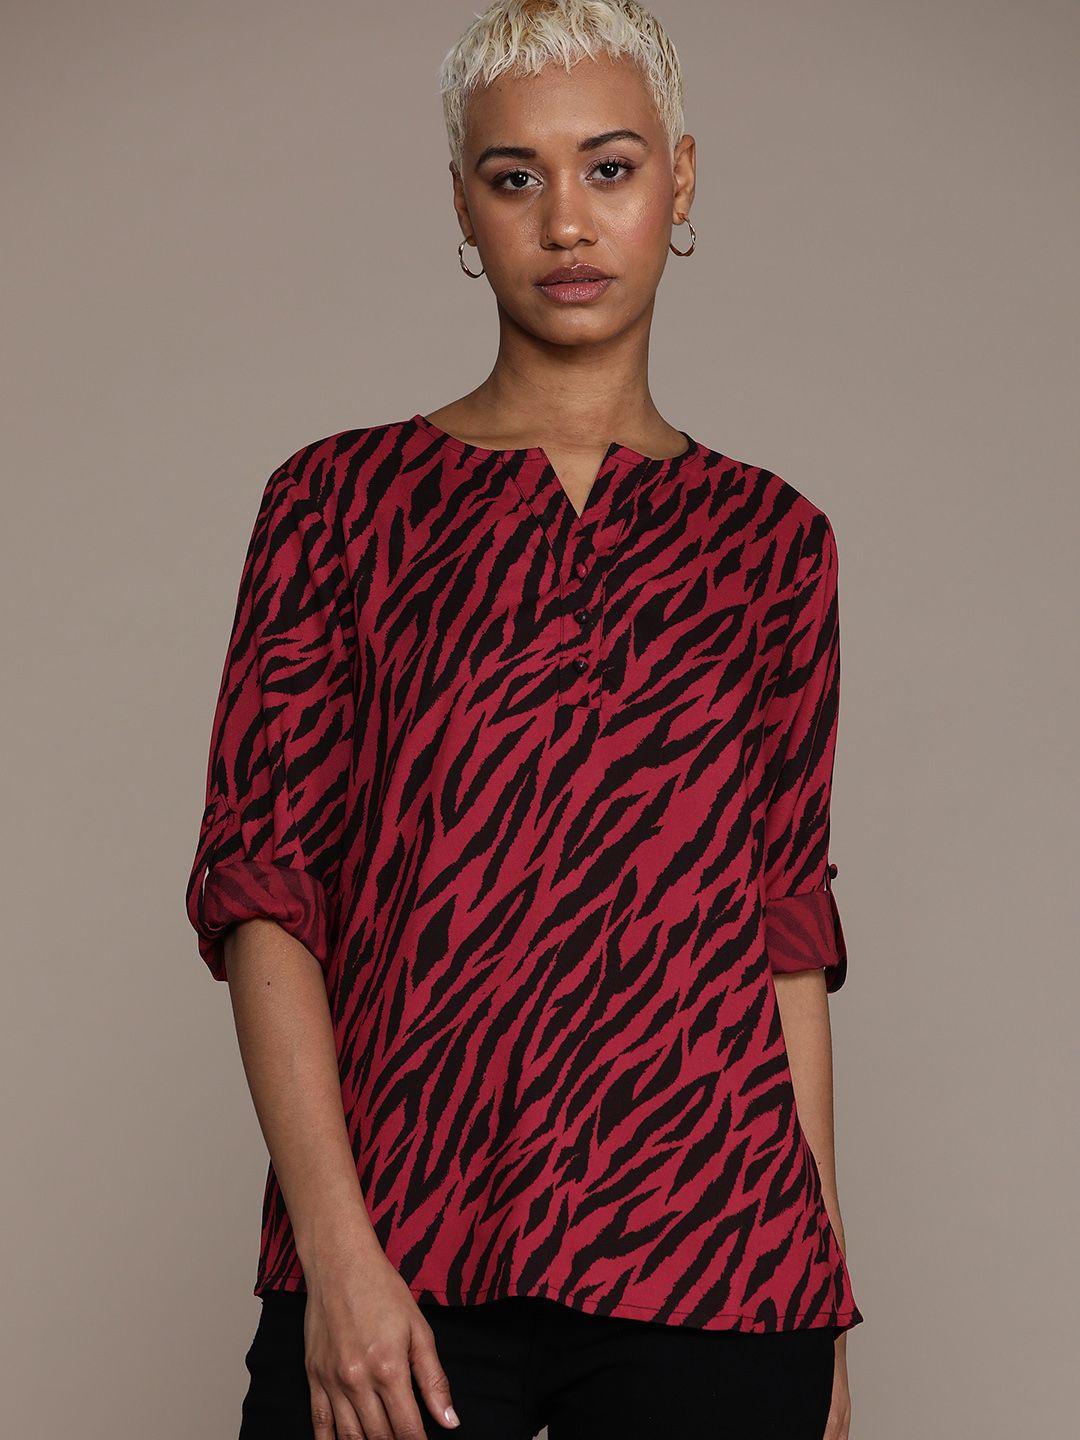 roadster animal print roll-up sleeves shirt style top